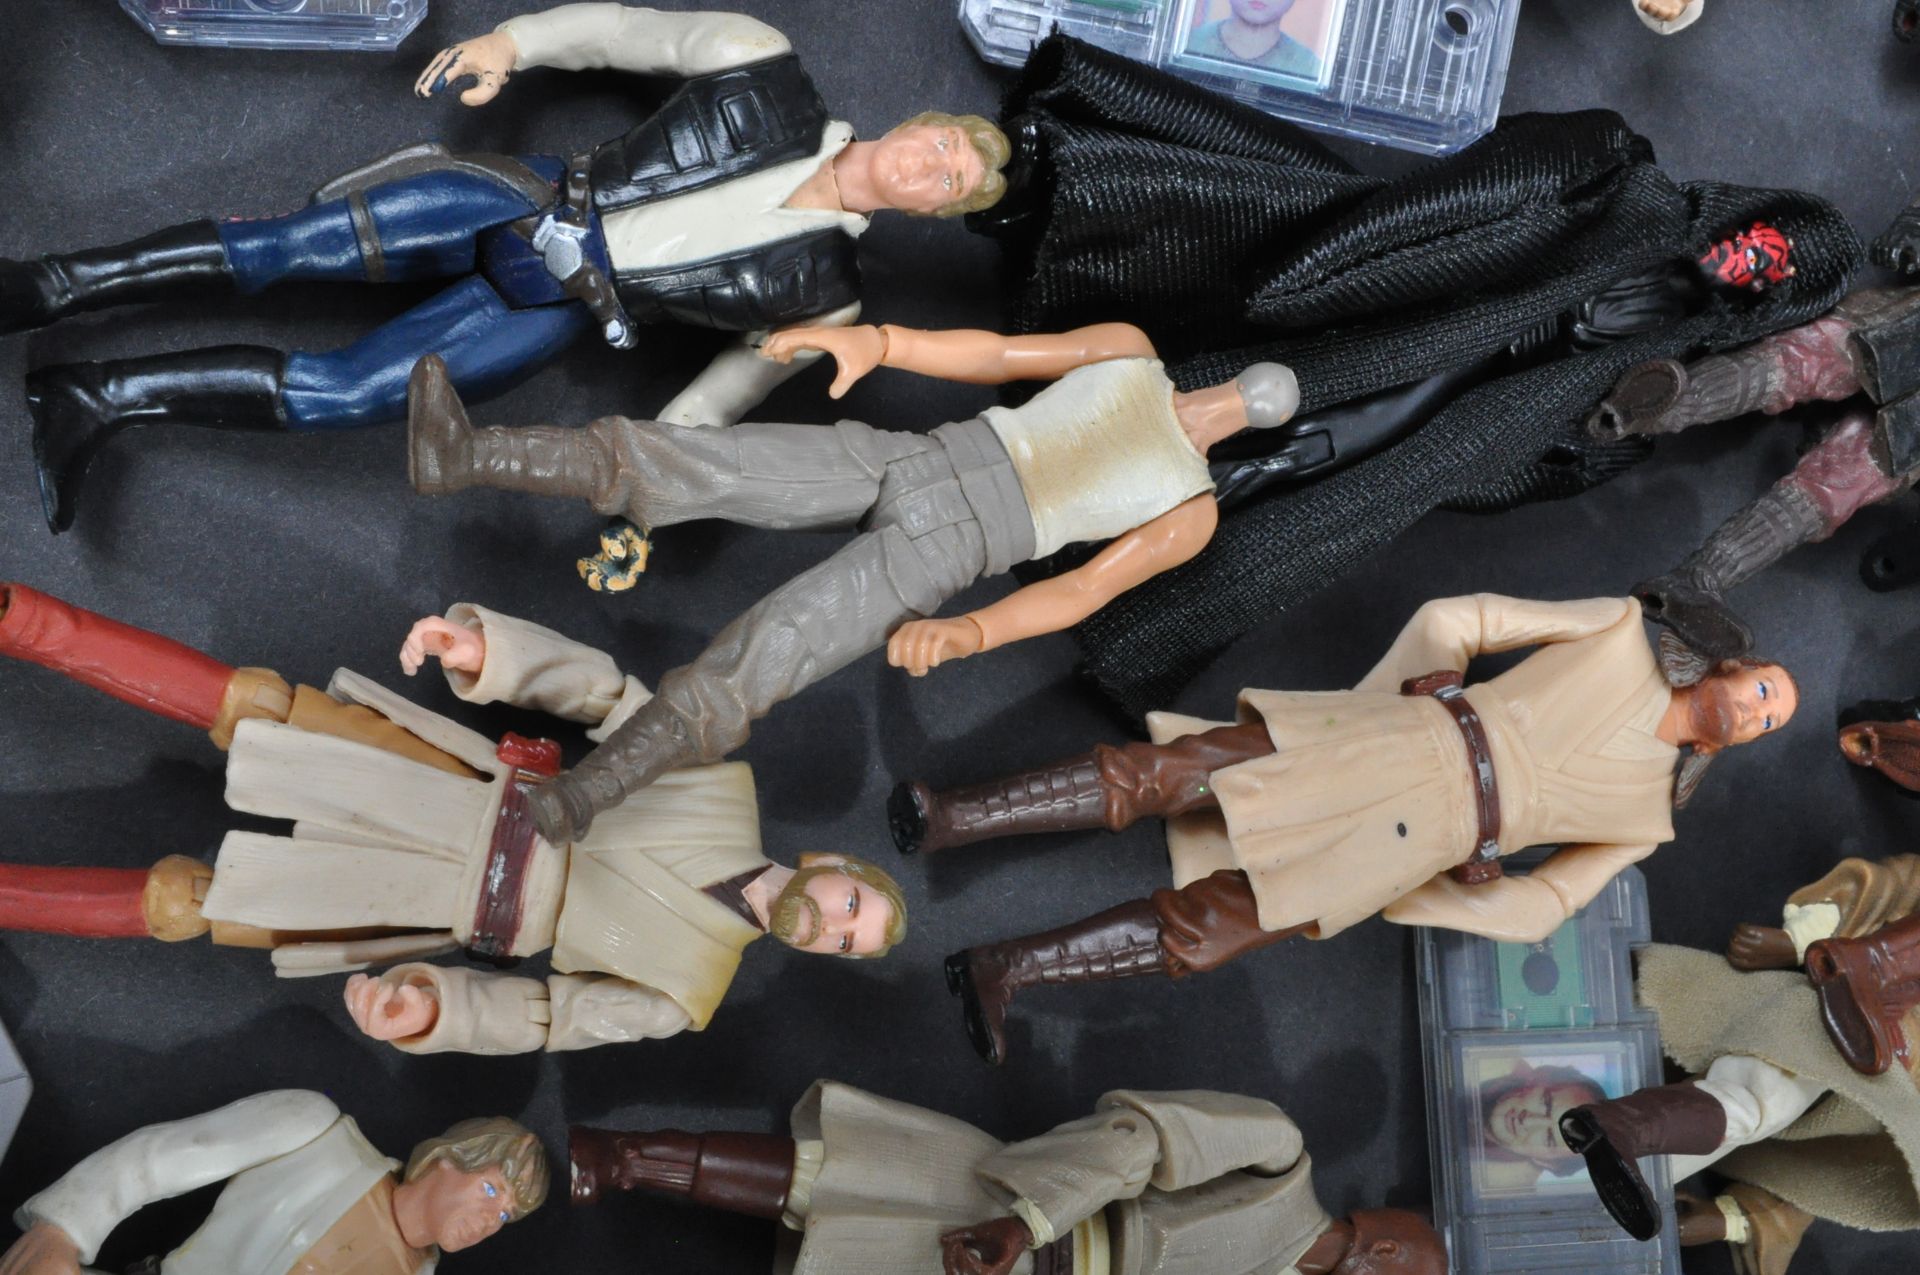 STAR WARS - LARGE COLLECTION KENNER / HASBRO CLONE WARS & OTHER FIGURES - Image 8 of 10